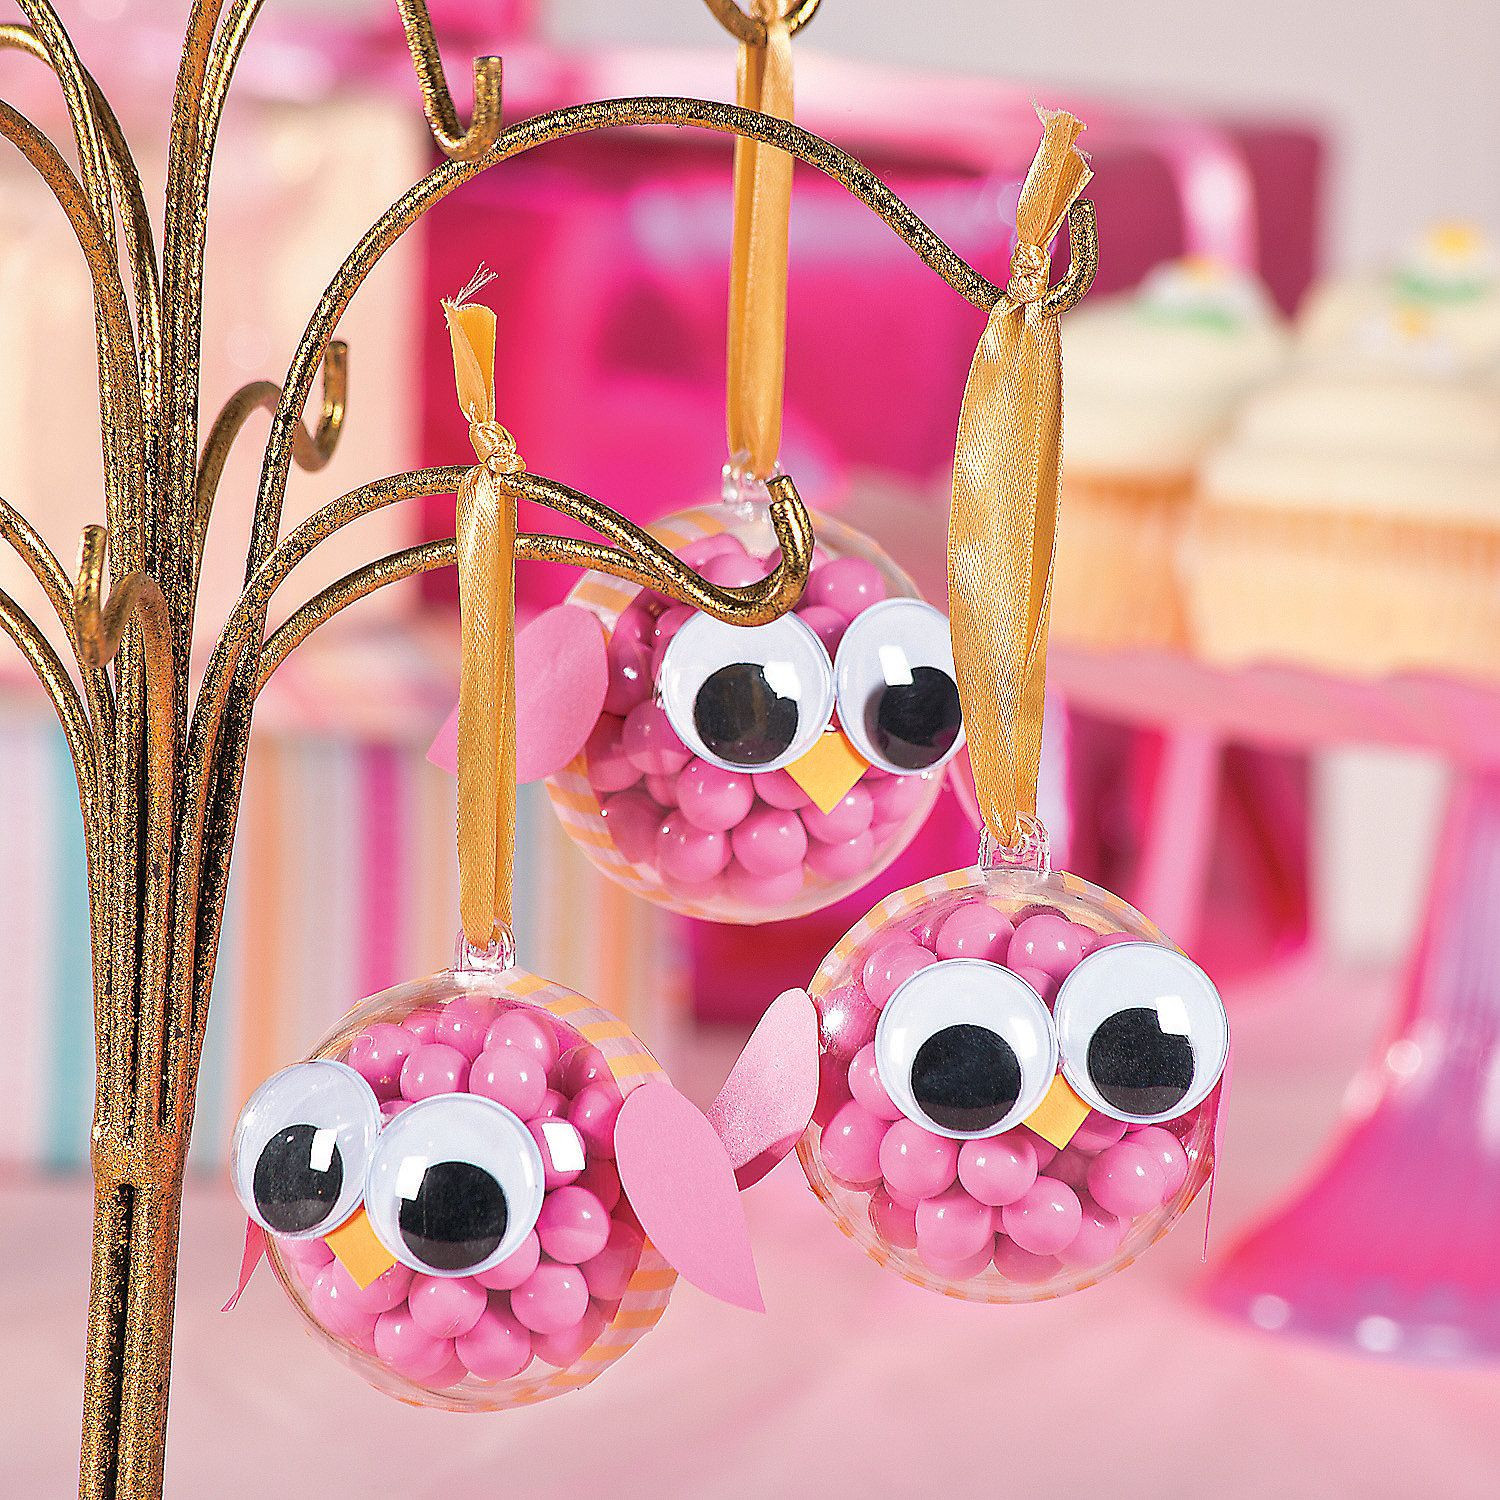 Owl Baby Shower Gifts
 Owl Baby Shower Favors Idea